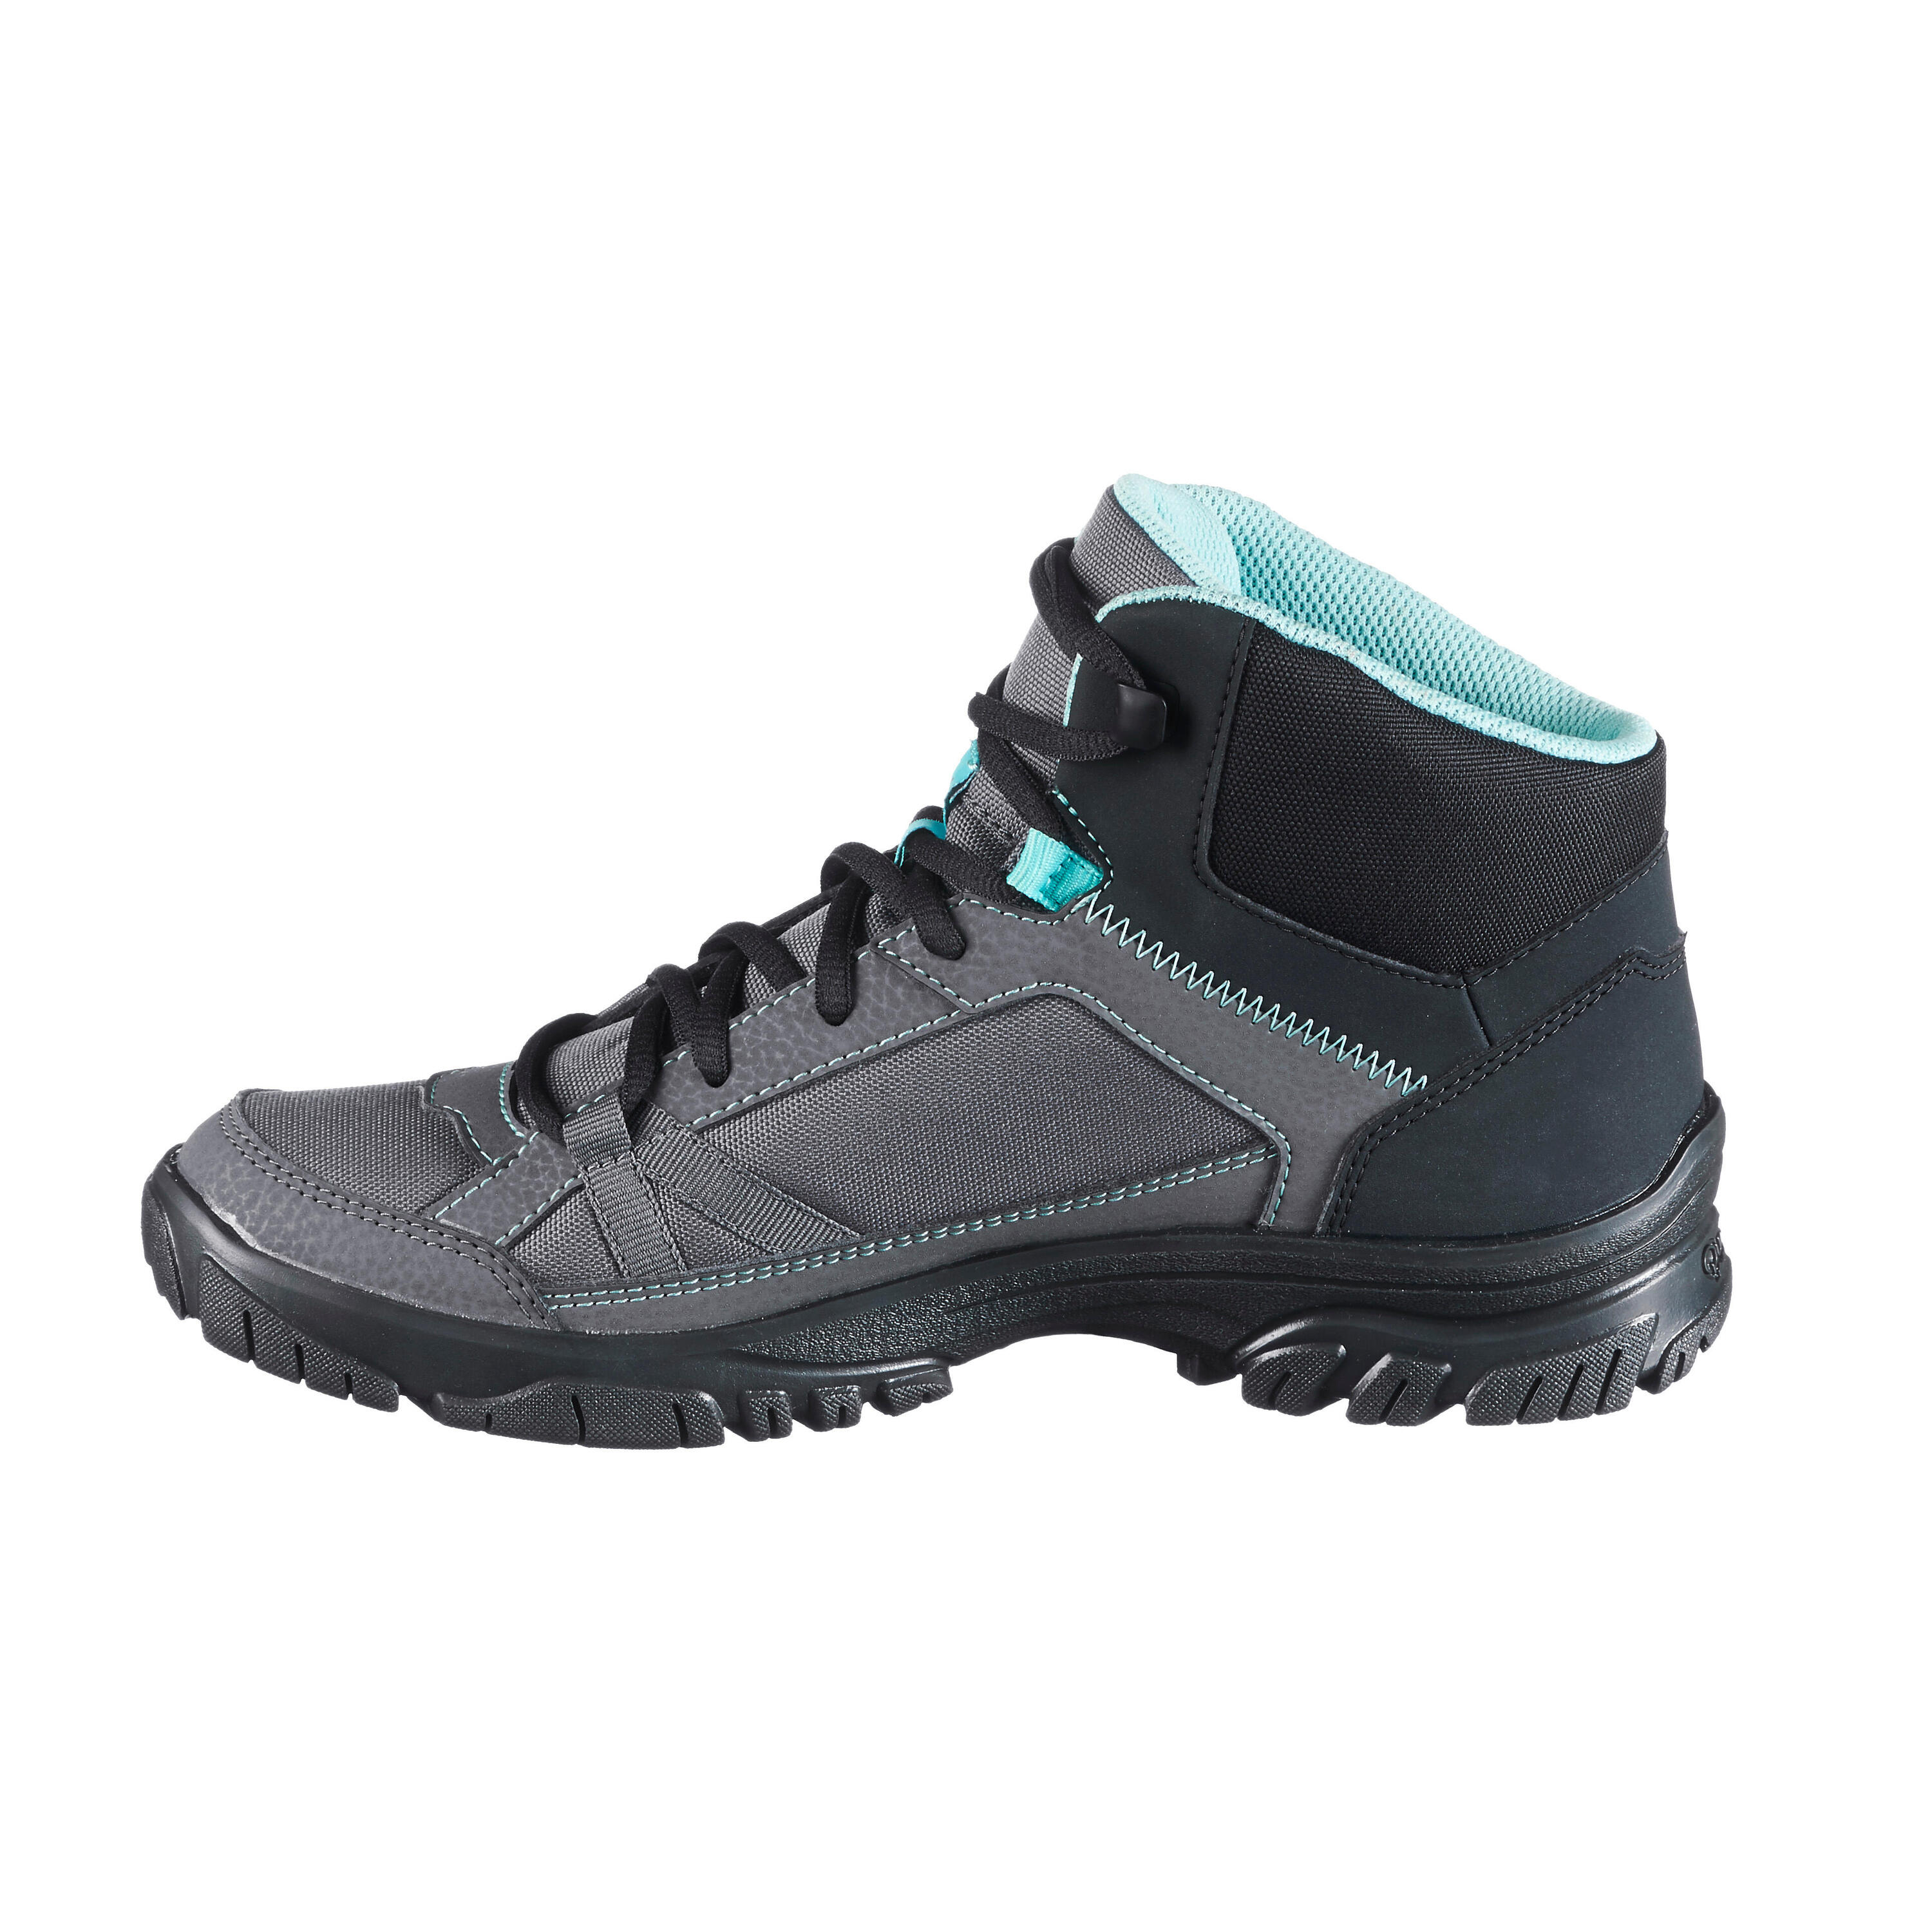 Women’s Hiking Boots - NH100 Mid 2/7